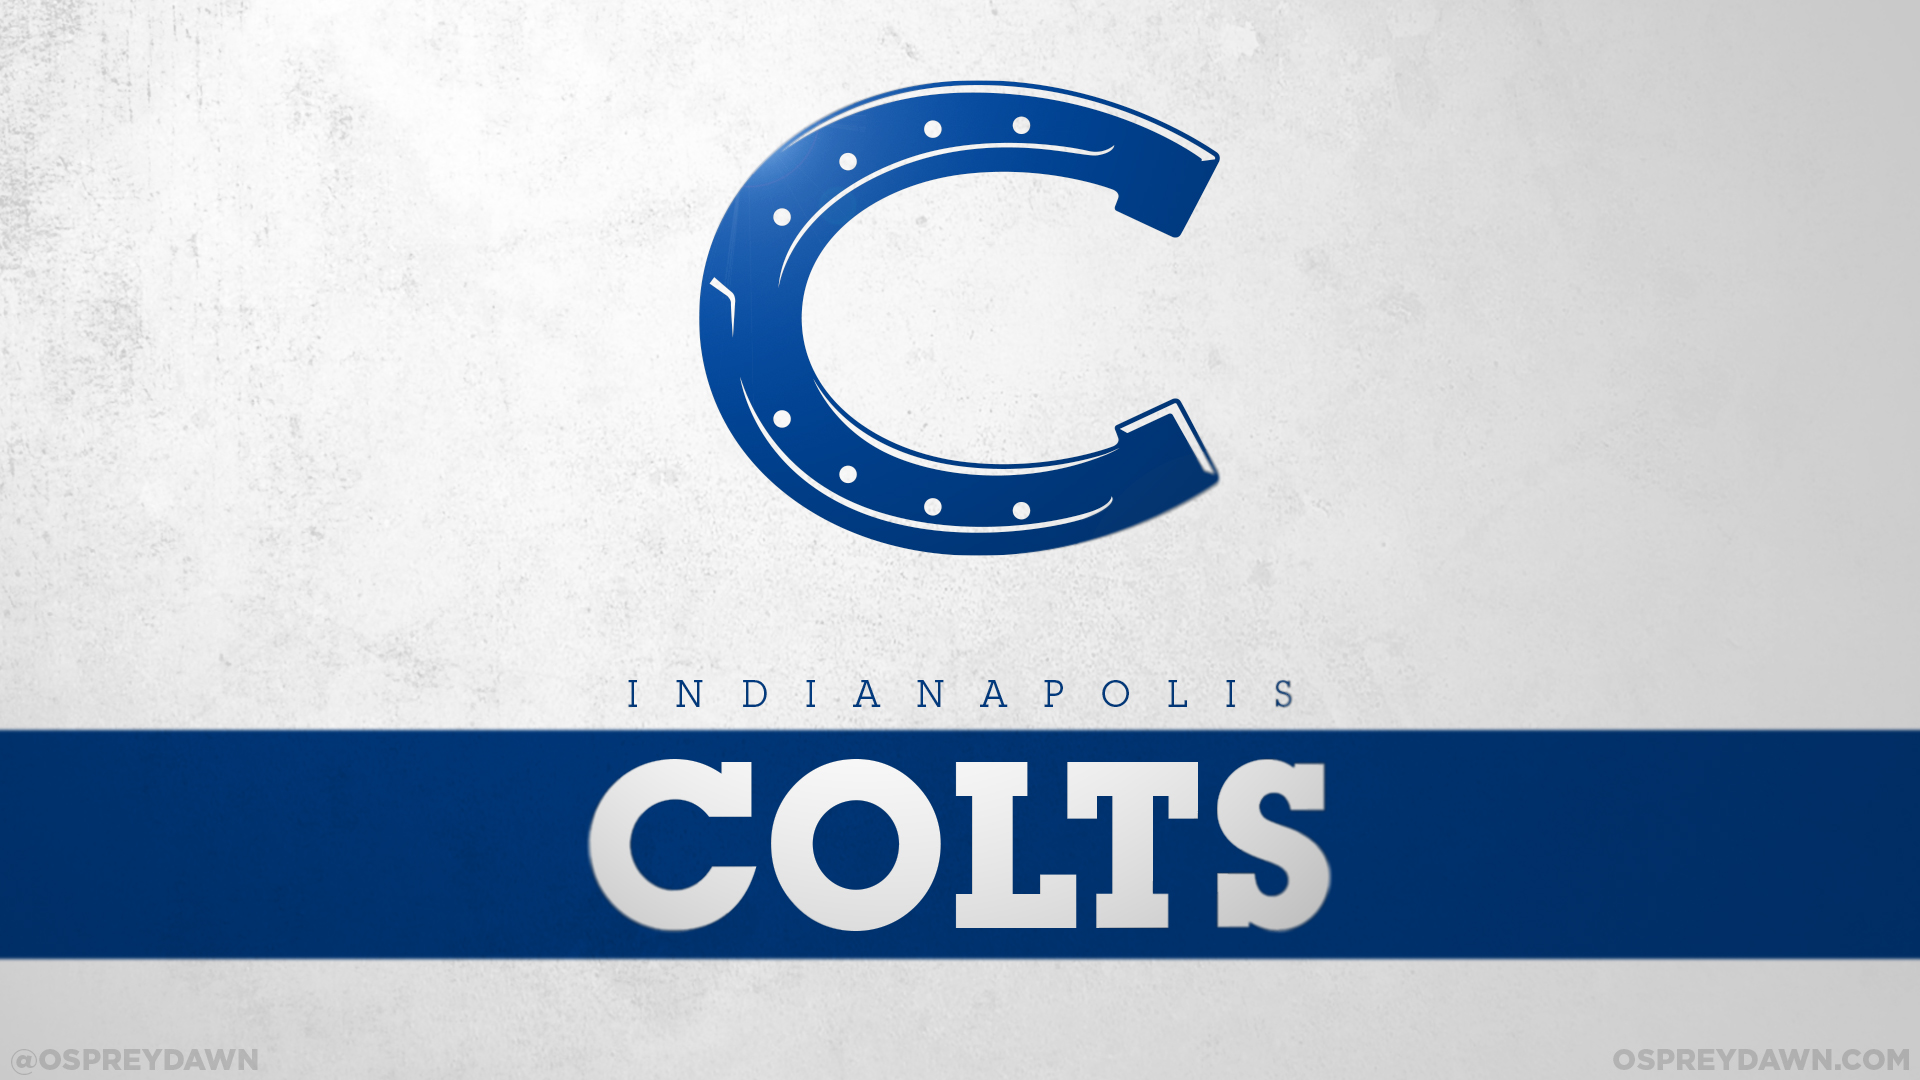 The Indianapolis Colts - Osprey Dawn